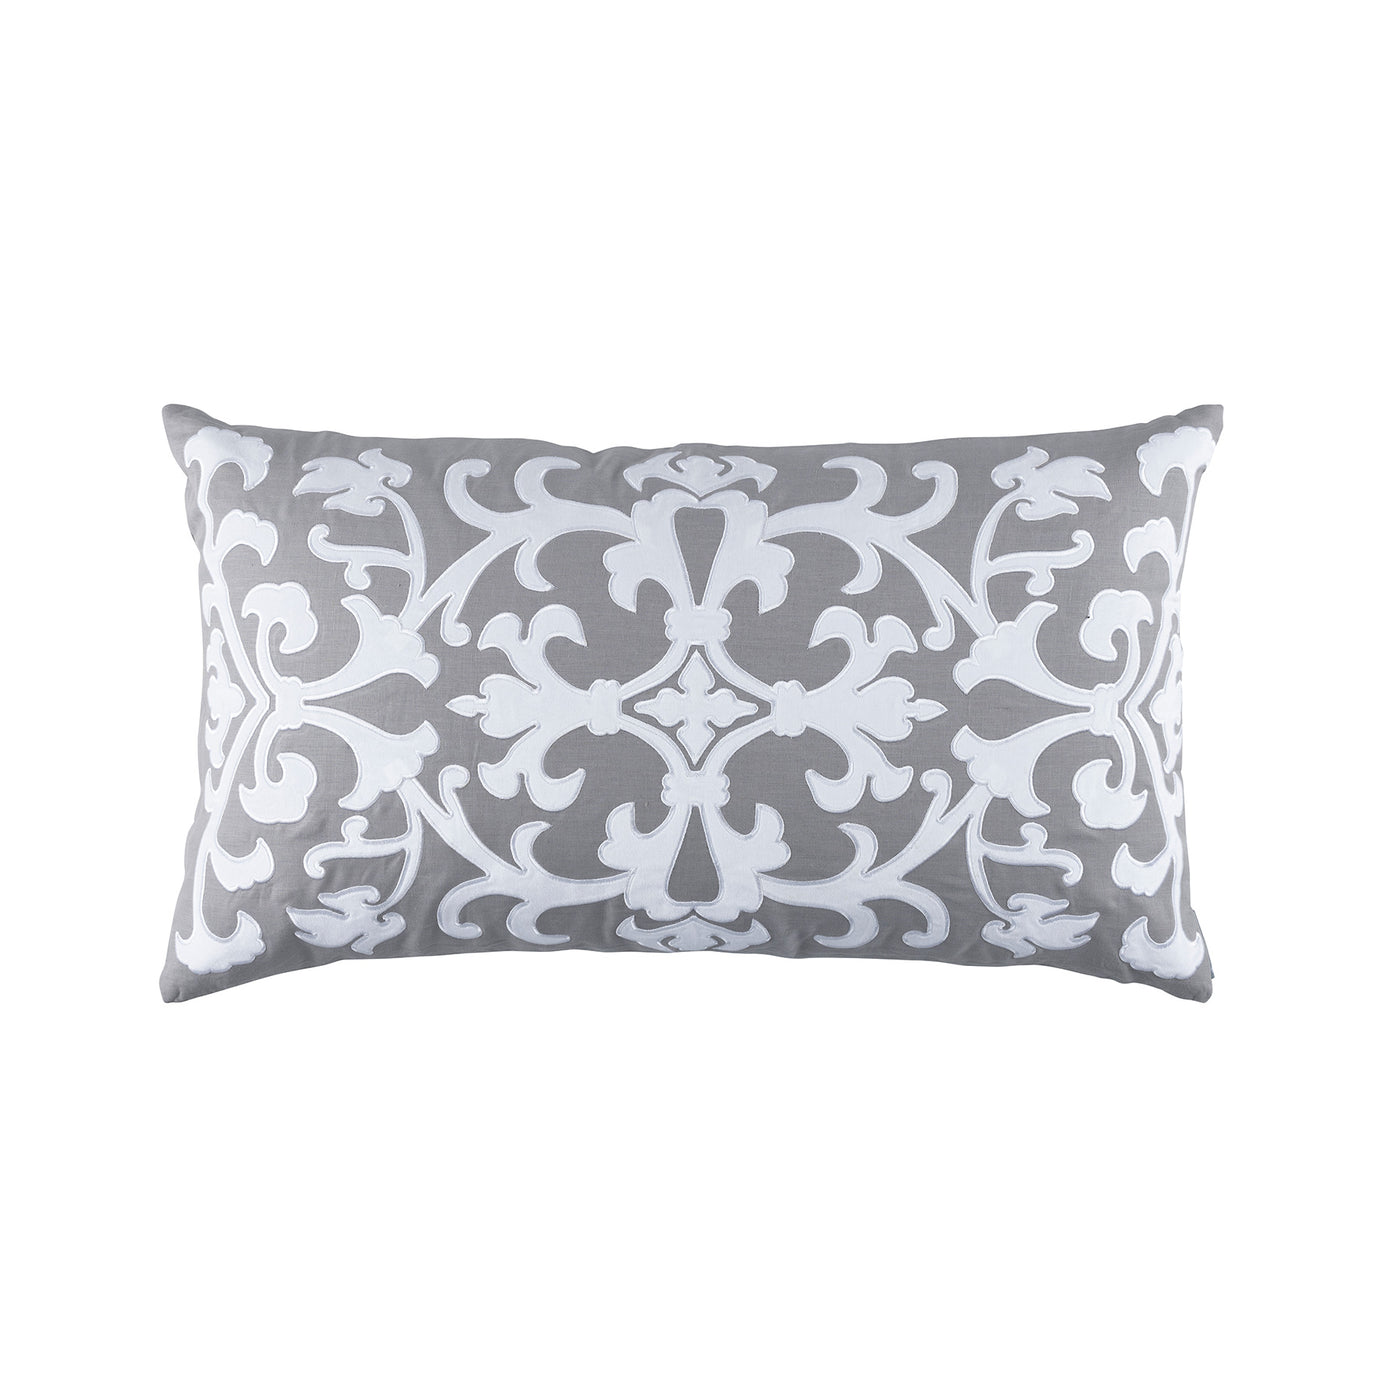 Olivia Lg Rect Light Grey Ivory Pillow 18X30 (Insert Included)